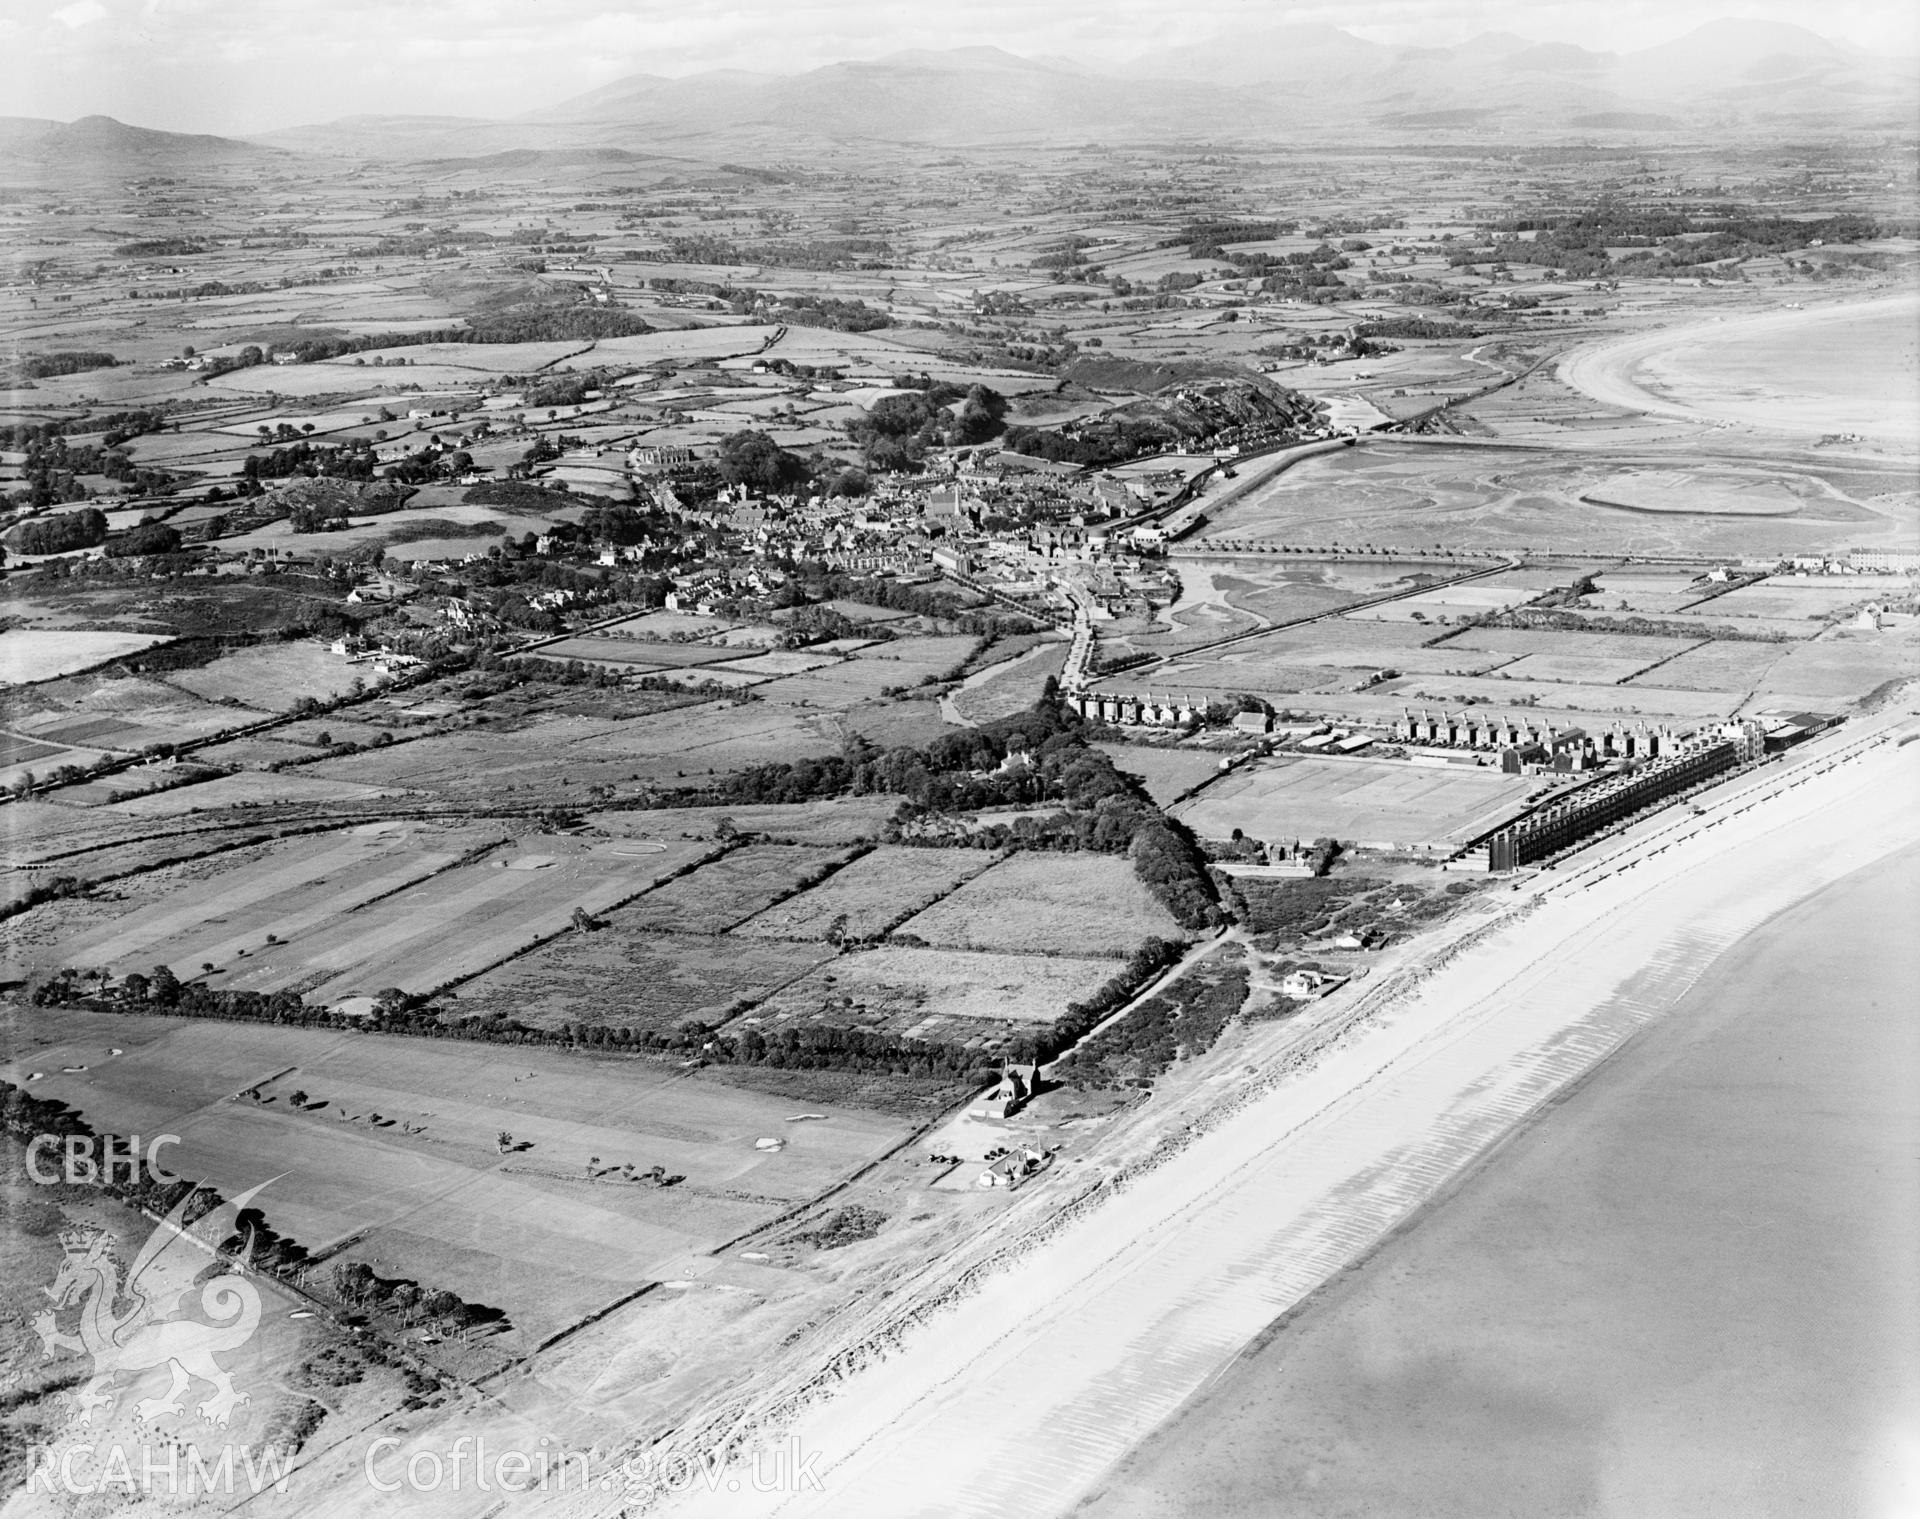 View of Pwllheli showing promenade, oblique aerial view. 5?x4? black and white glass plate negative.